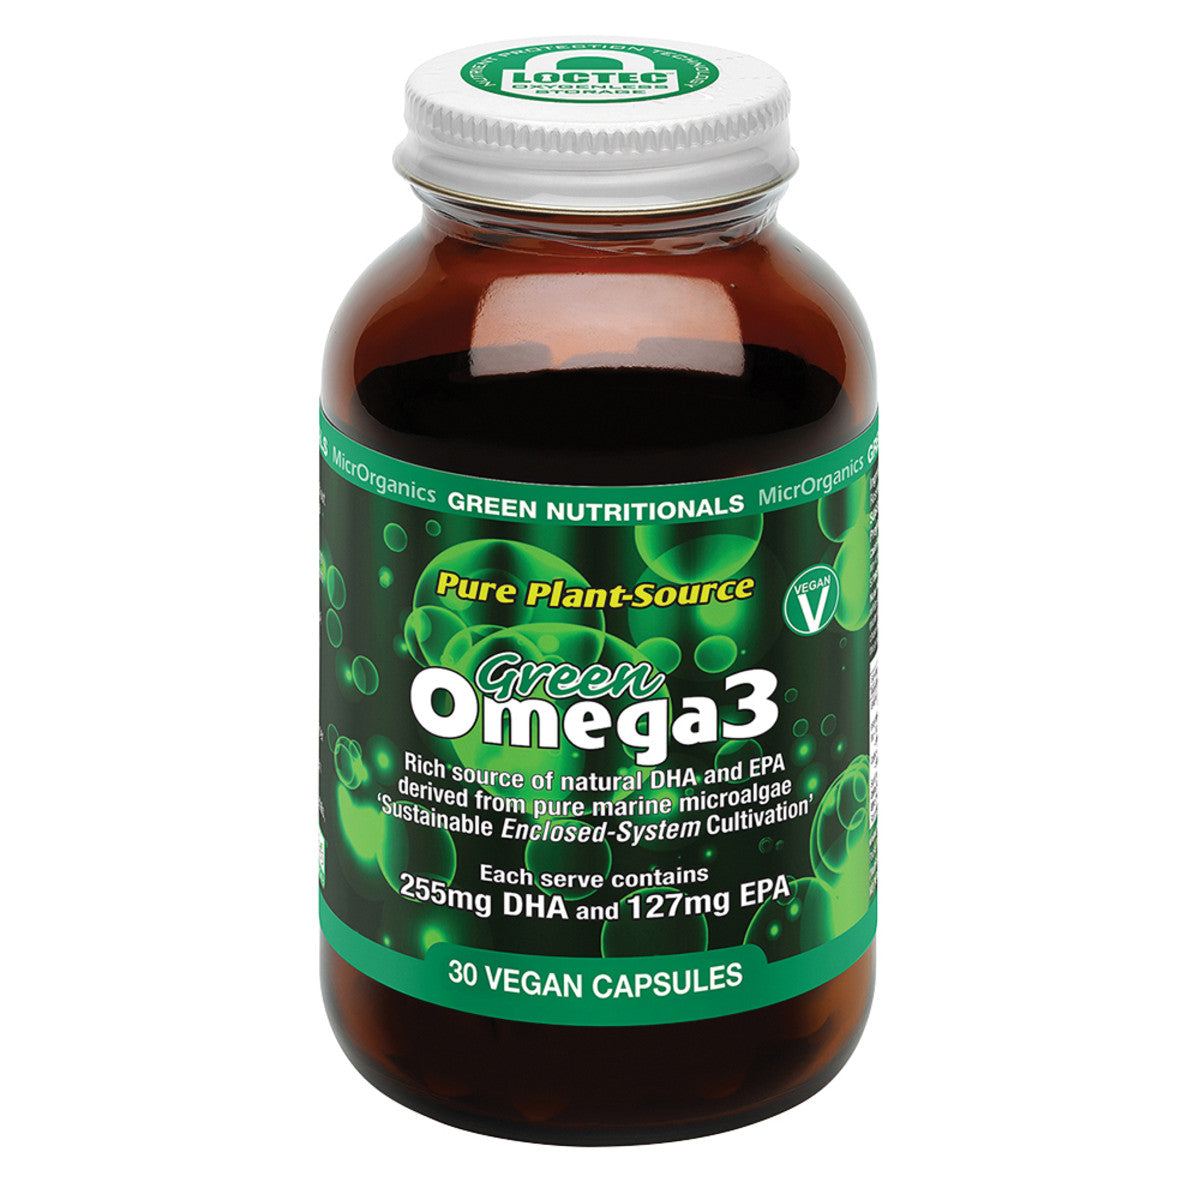 Green Nutritionals - Pure Plant-Source Green Omega3